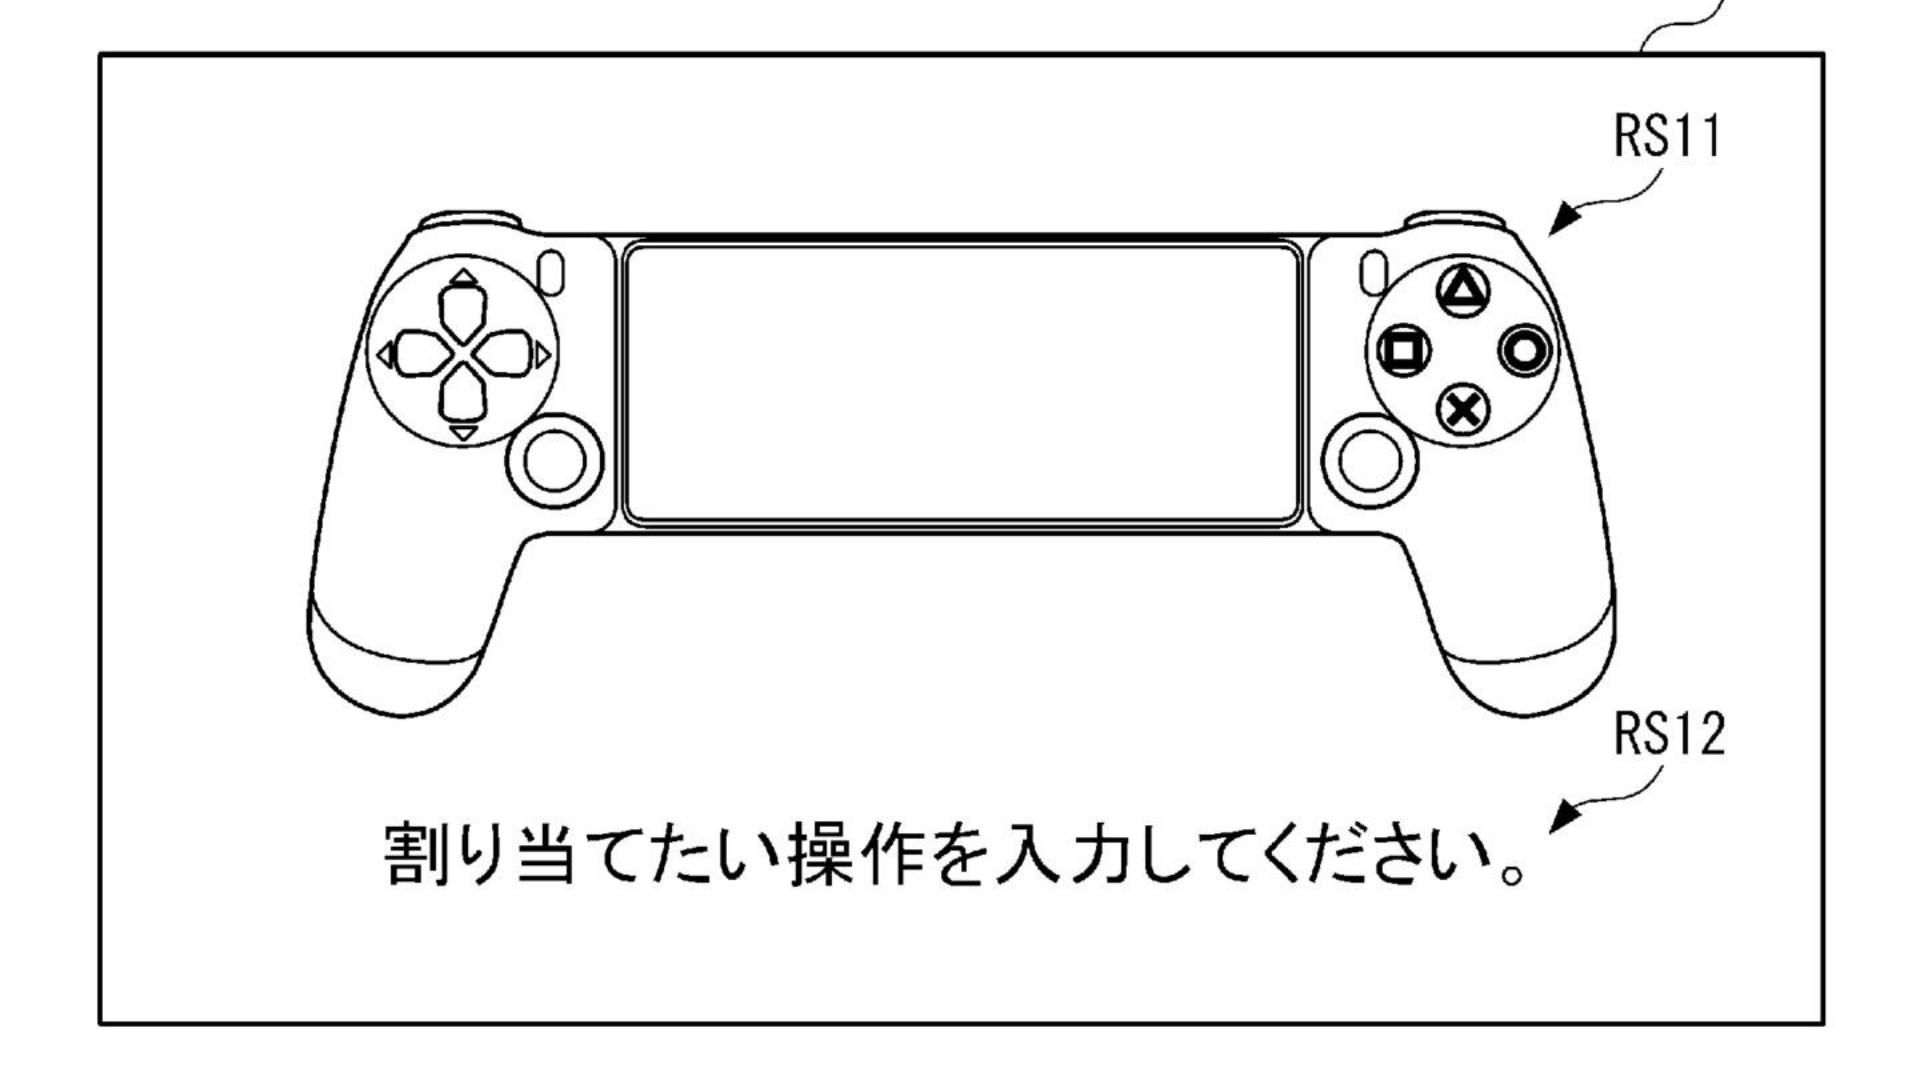 PlayStation mobile game patents transforms phones into controllers